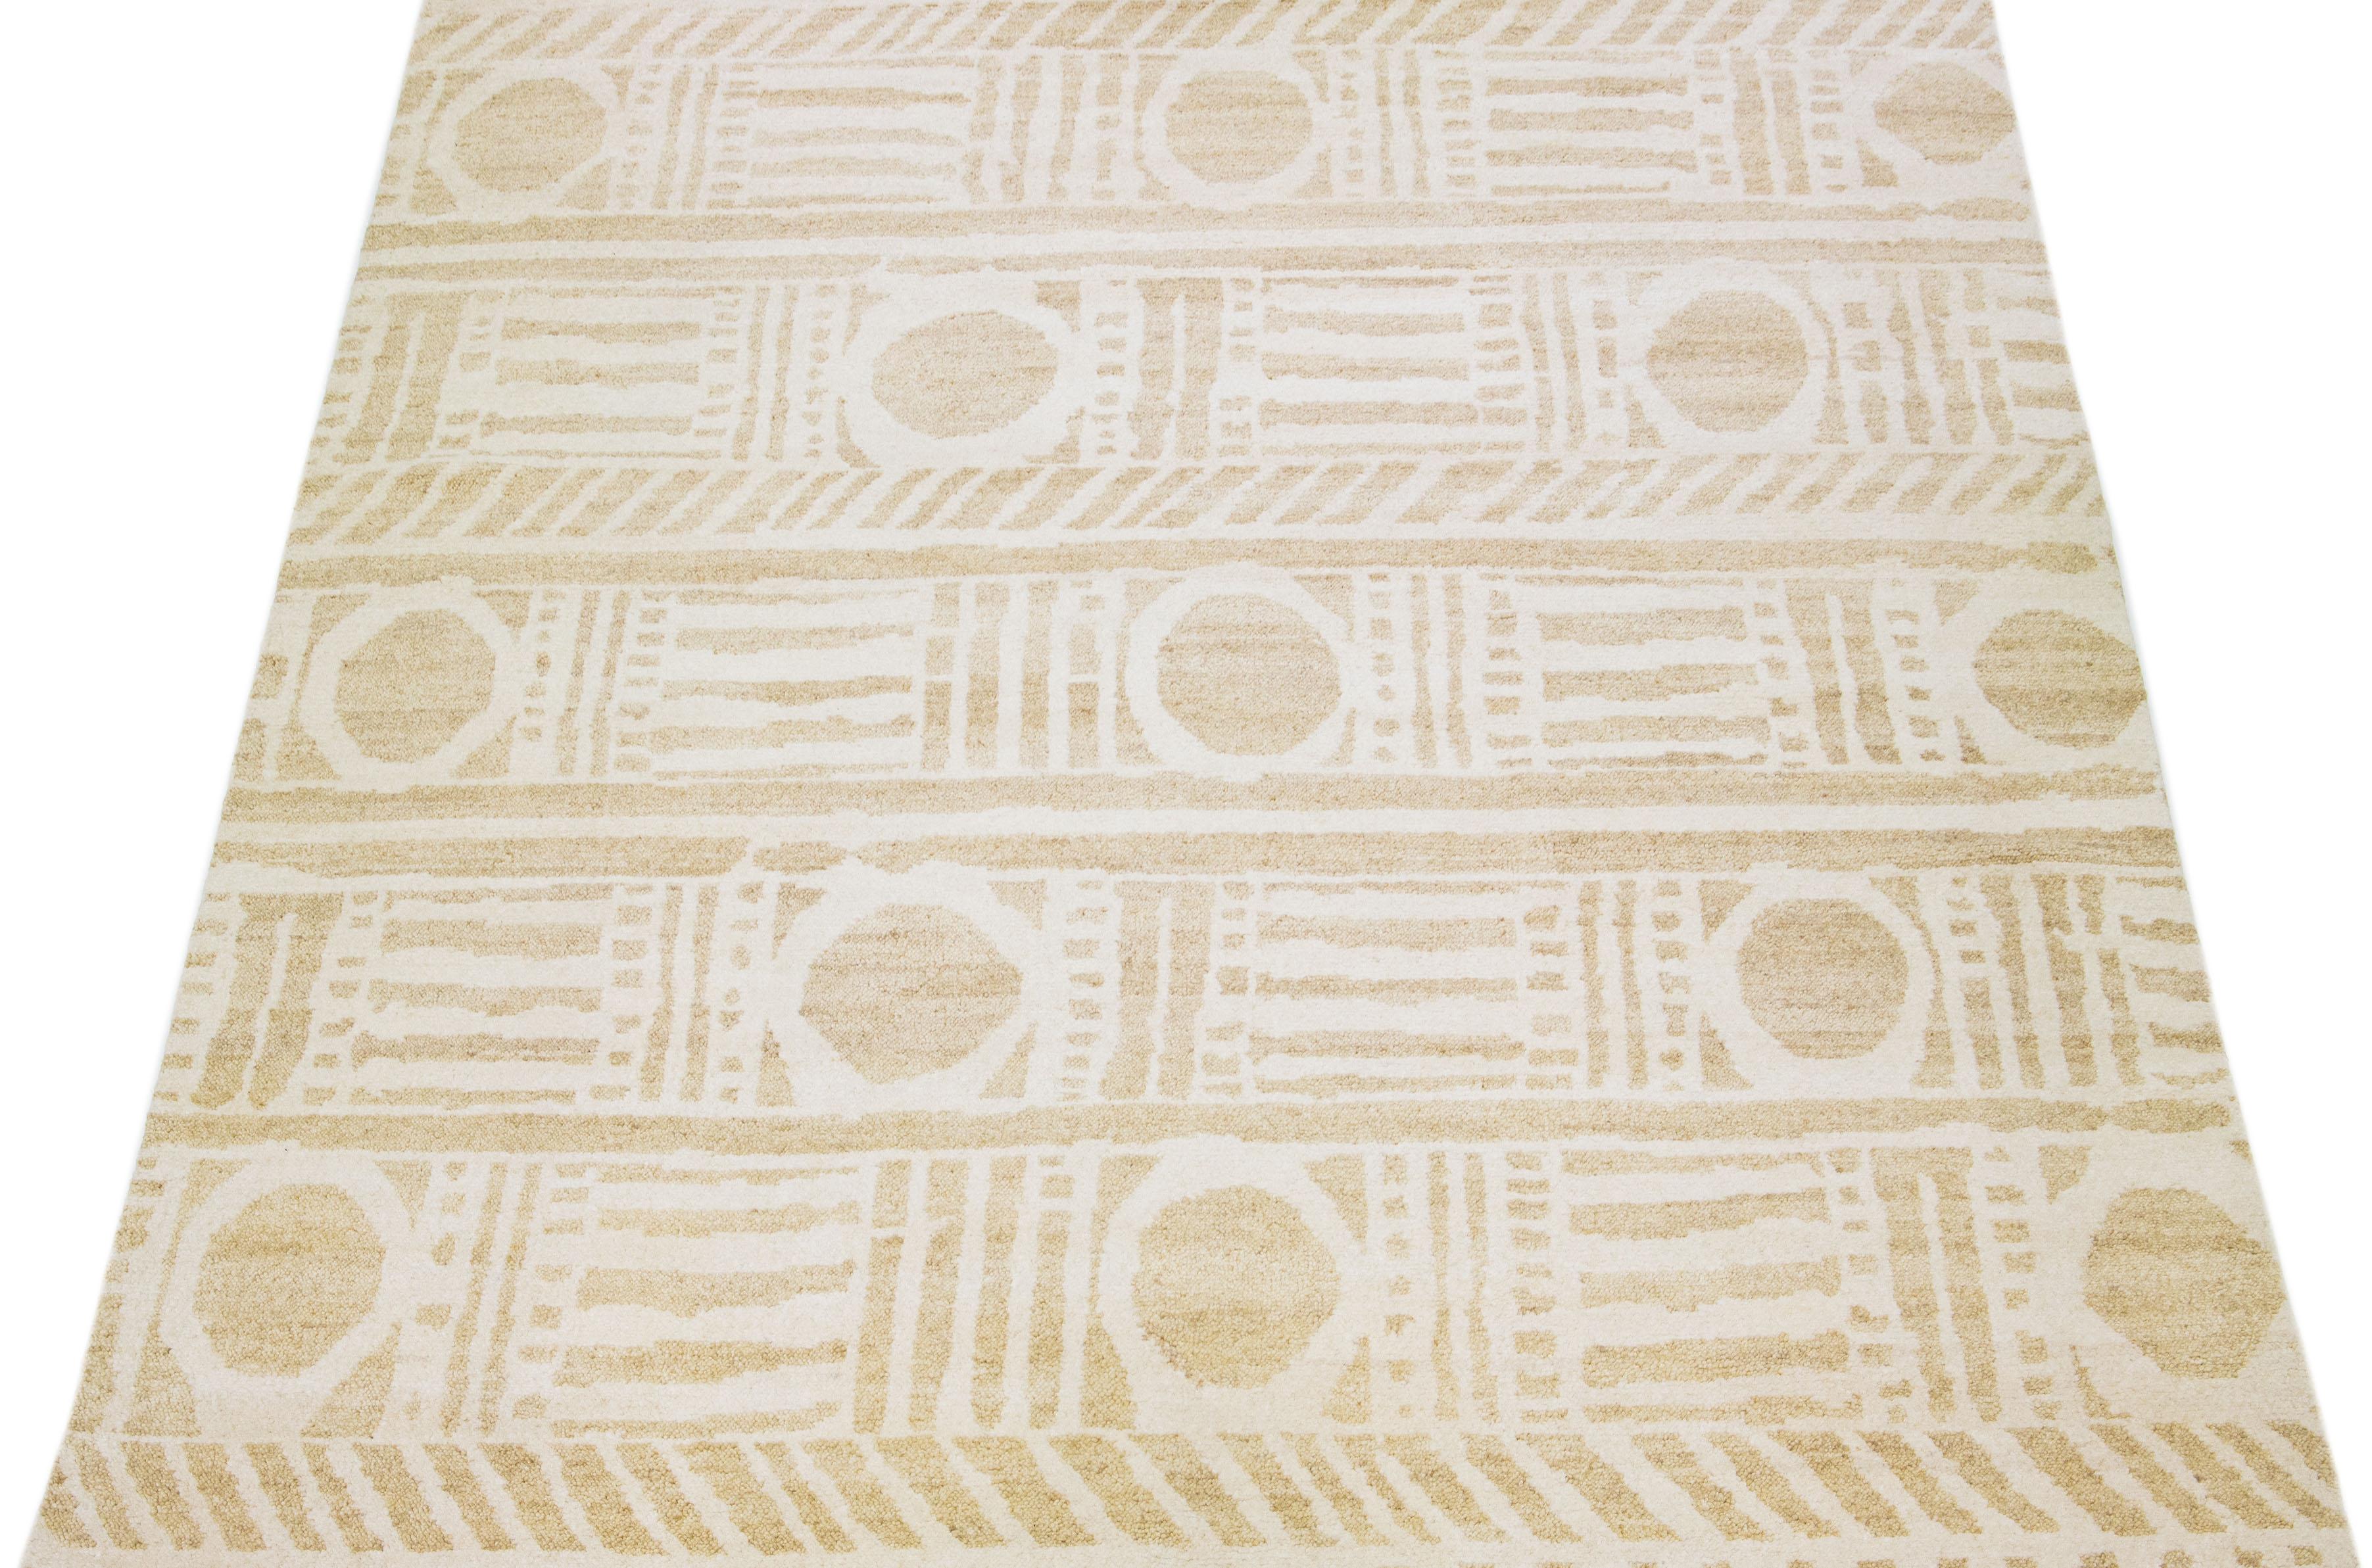 Beautiful Moroccan-style handmade wool rug with a beige color field. This Modern rug has ivory accents featuring a gorgeous all-over geometric boho motif.

This rug measures: 12' x 15'.

Our rugs are professional cleaning before shipping.